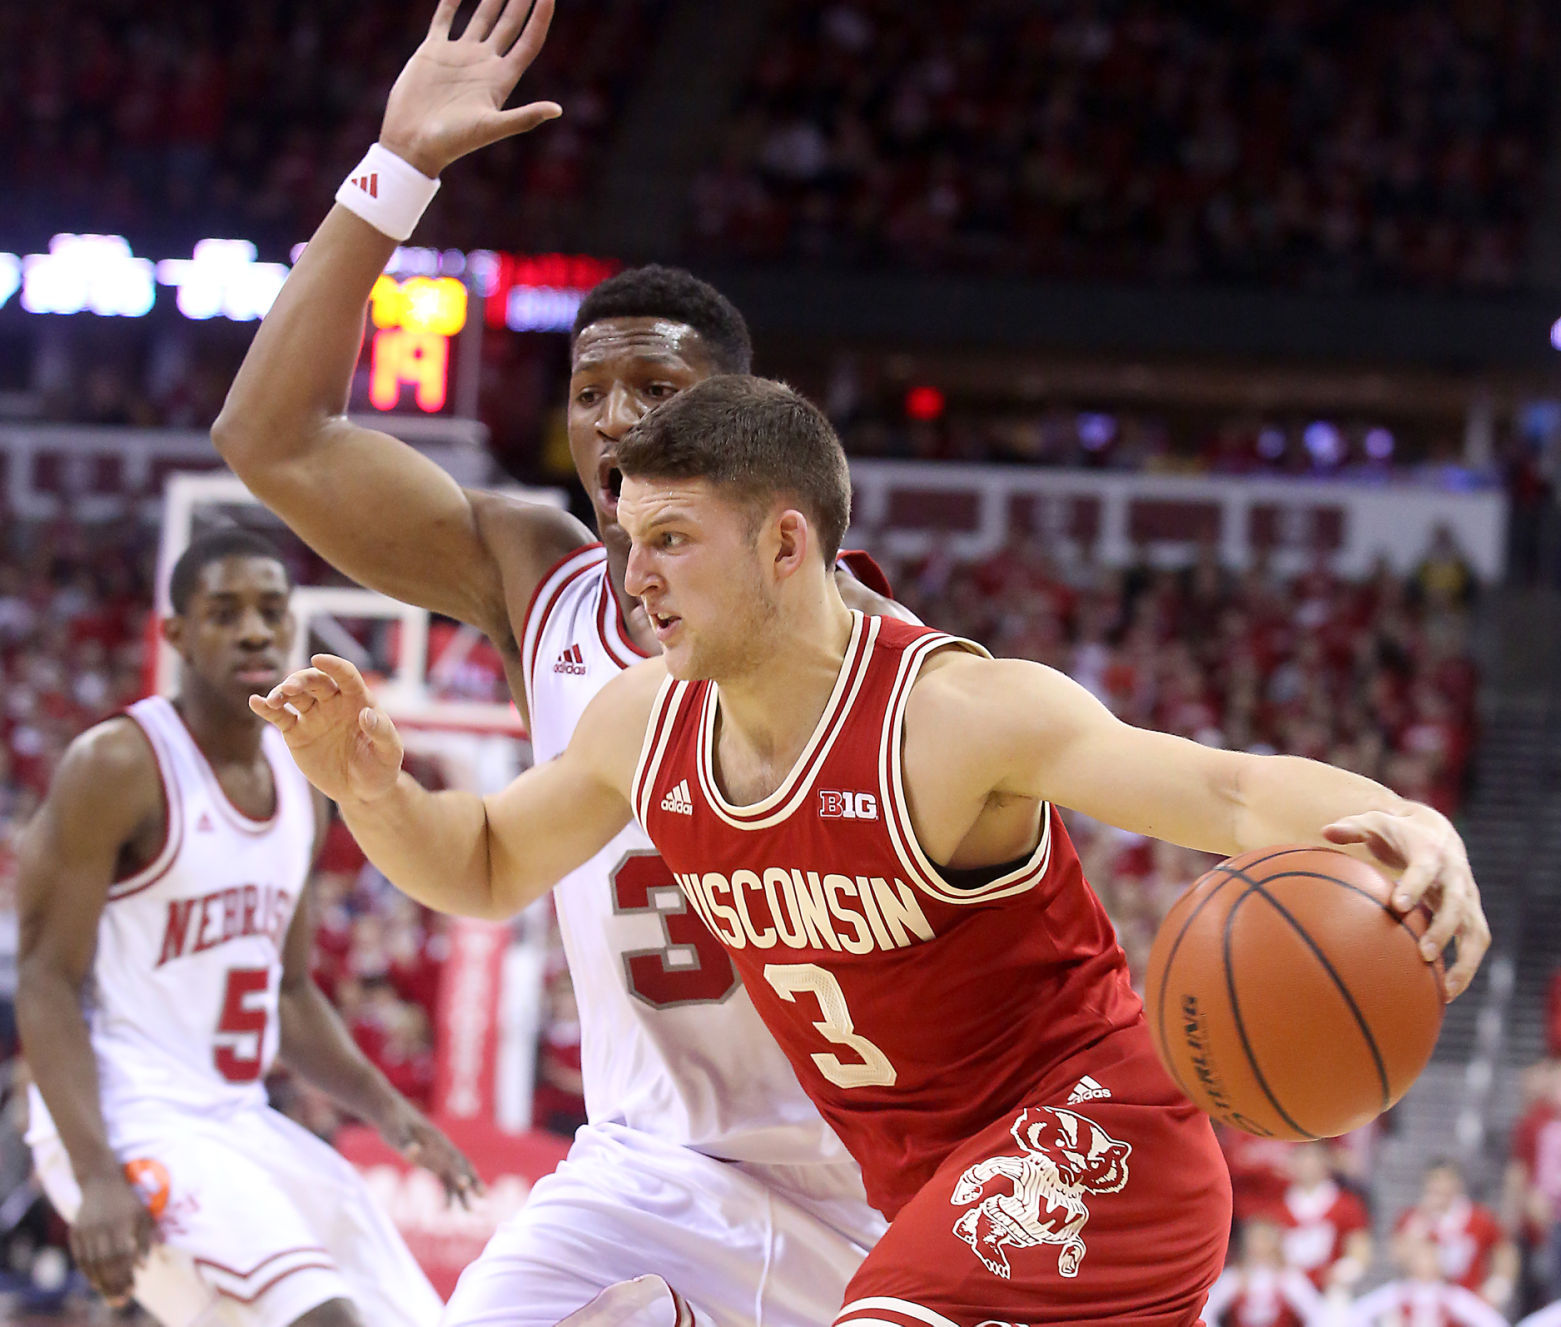 Badgers mens basketball Seen and heard at the Kohl Center